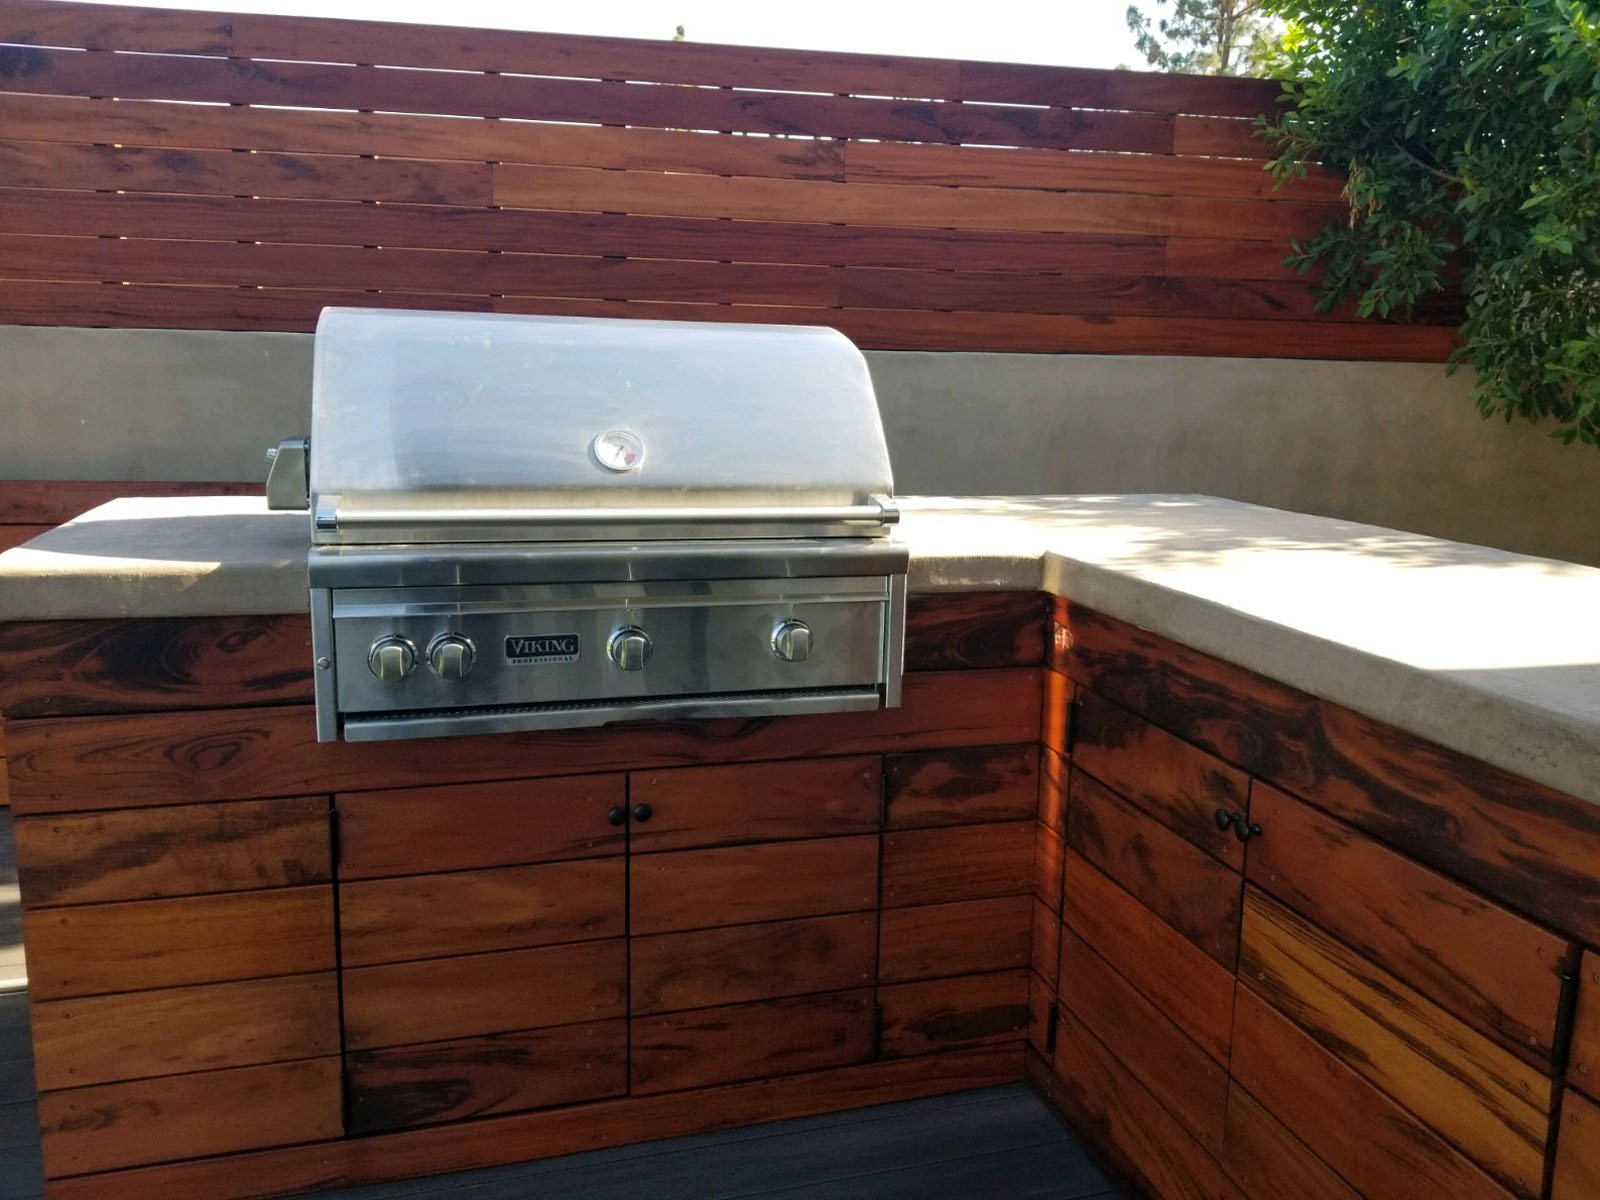 modern barbecue grill set in a wood and stone counter